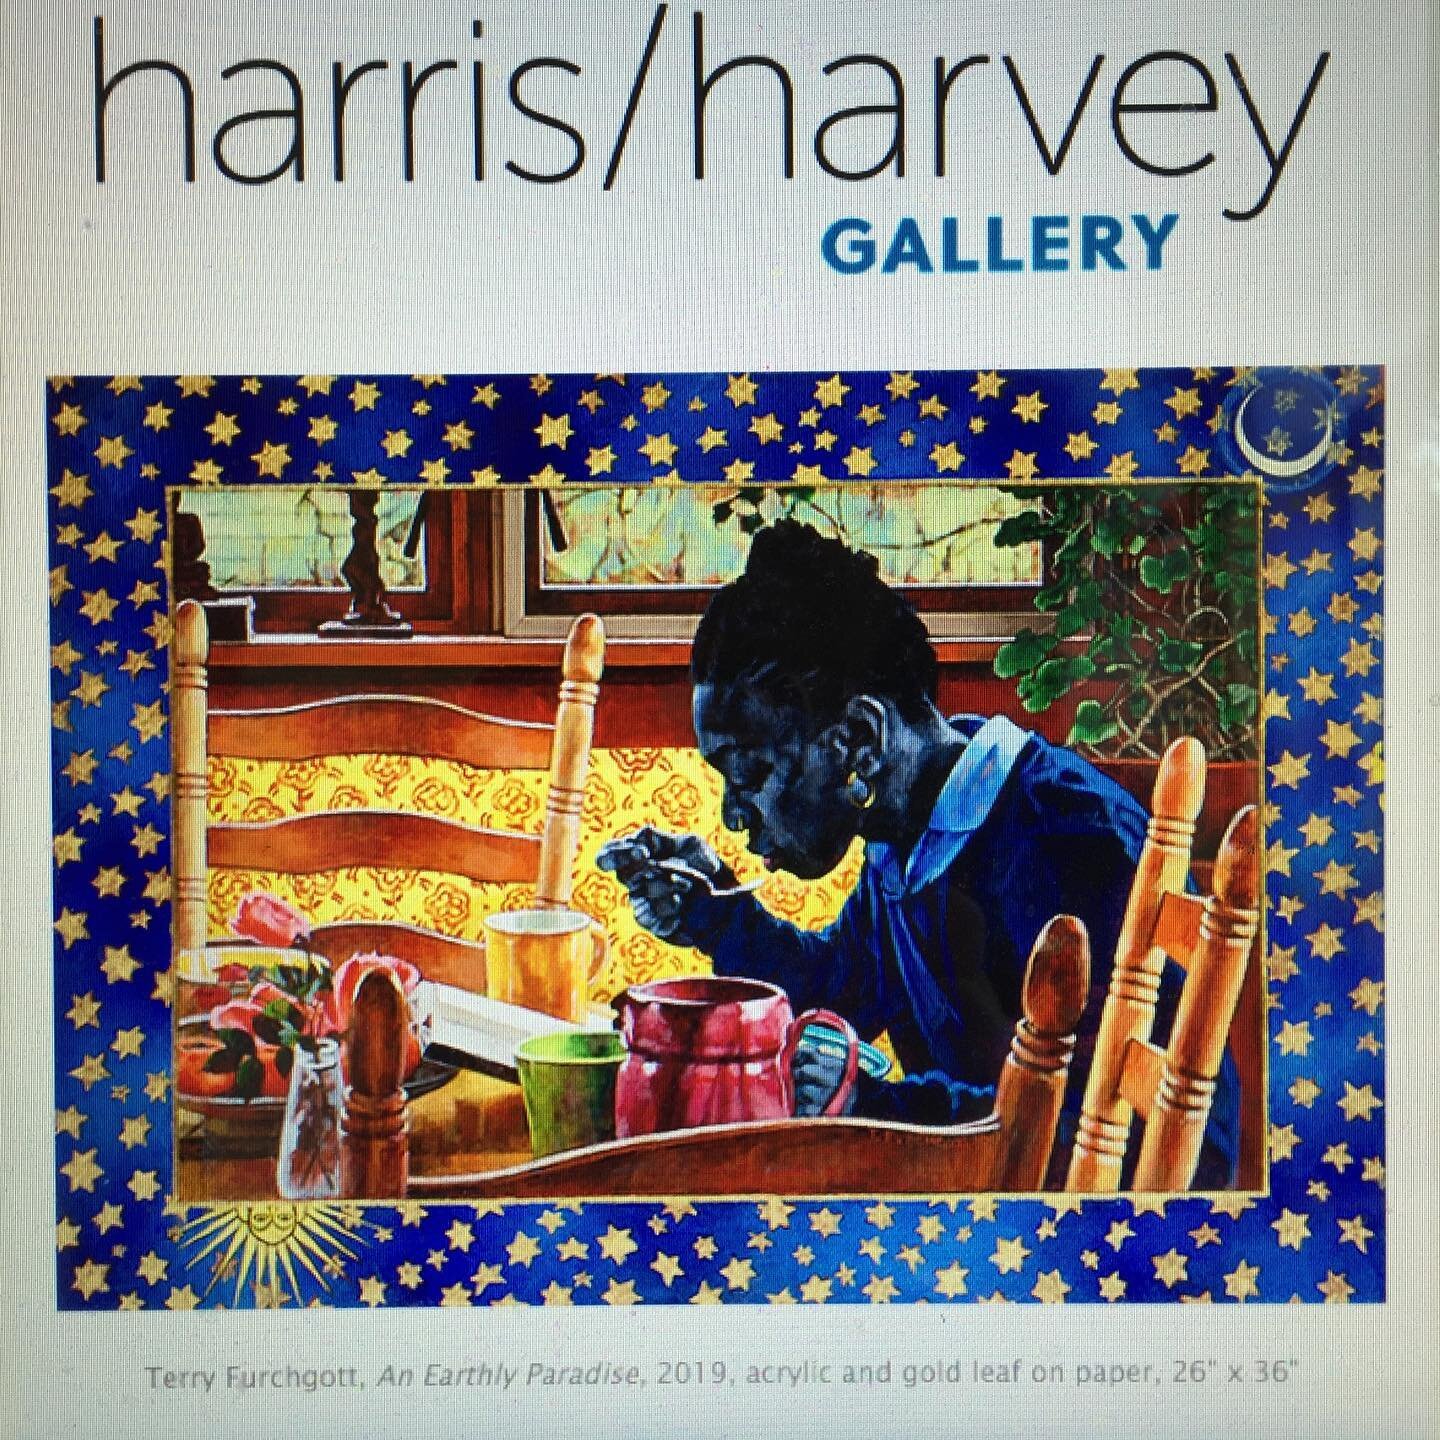 Last 2 weeks of my show here in Seattle!! Do get over to the gallery if you can. To see all the paintings together  on the walls with good lighting and so well hung ( thanks Sarah, Ann, and Lisa!) is a treat! #terryfurchgott.com #harrisharveygallery 